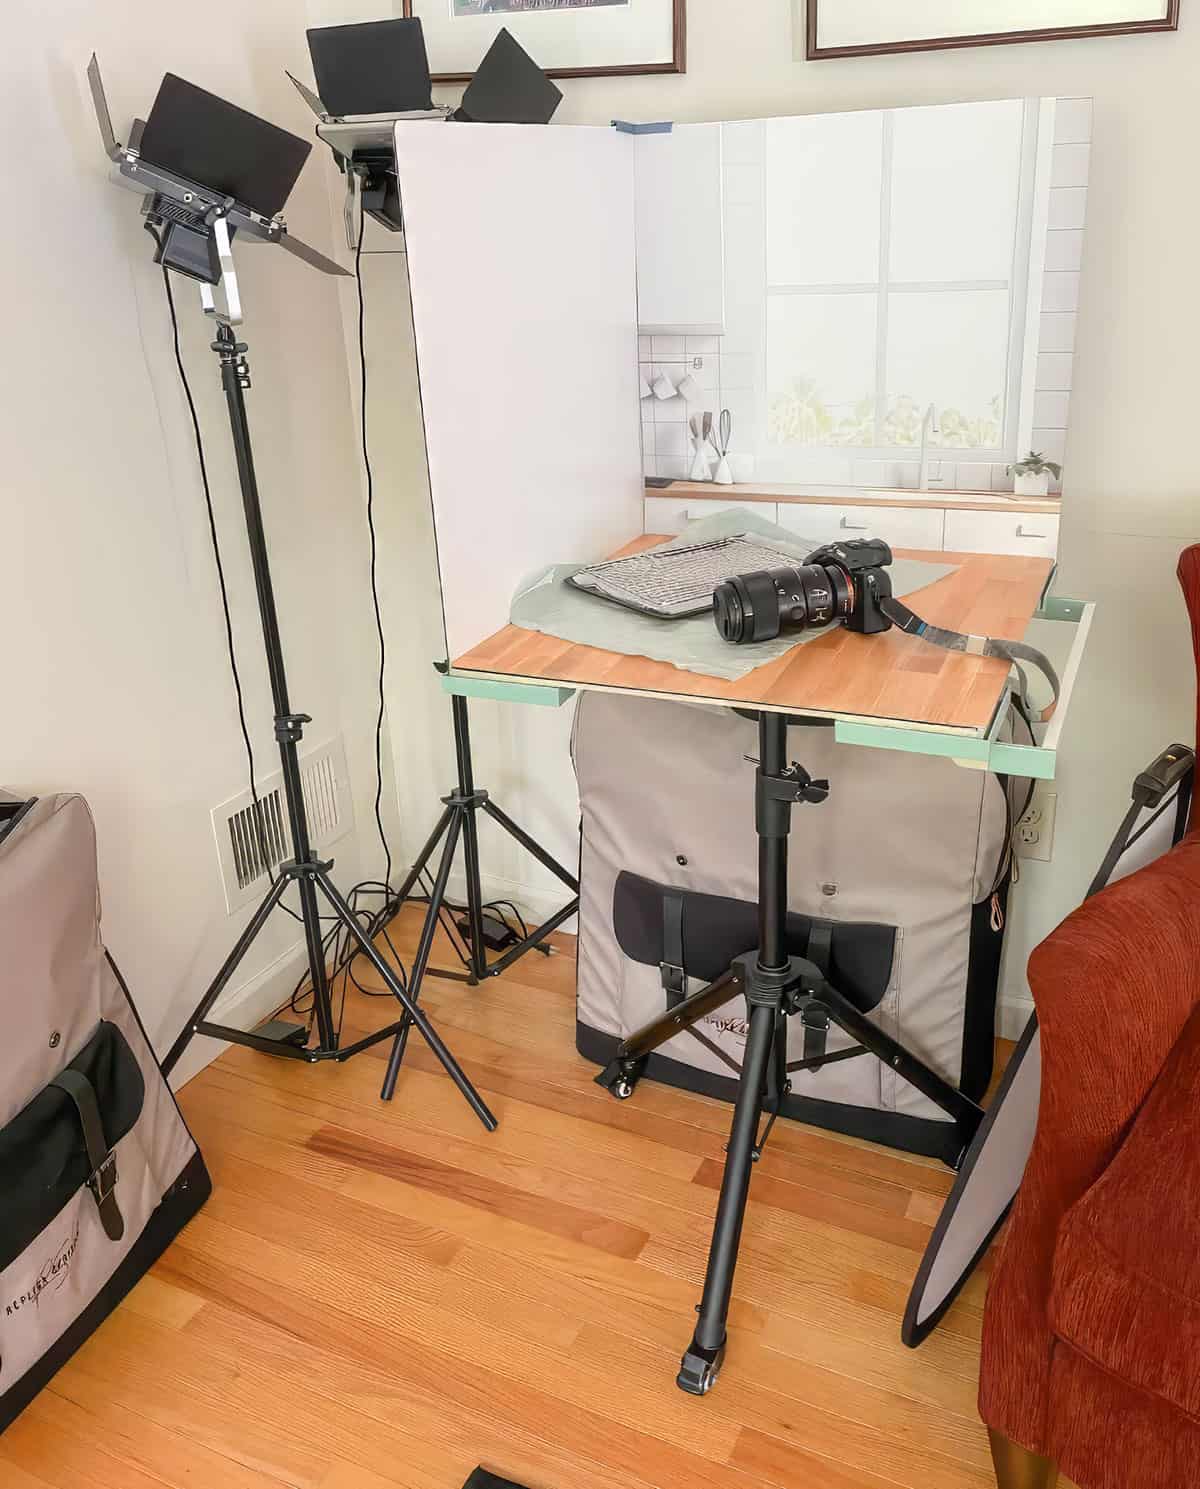 A view of my set up for taking photos from Replica Surfaces Studio.